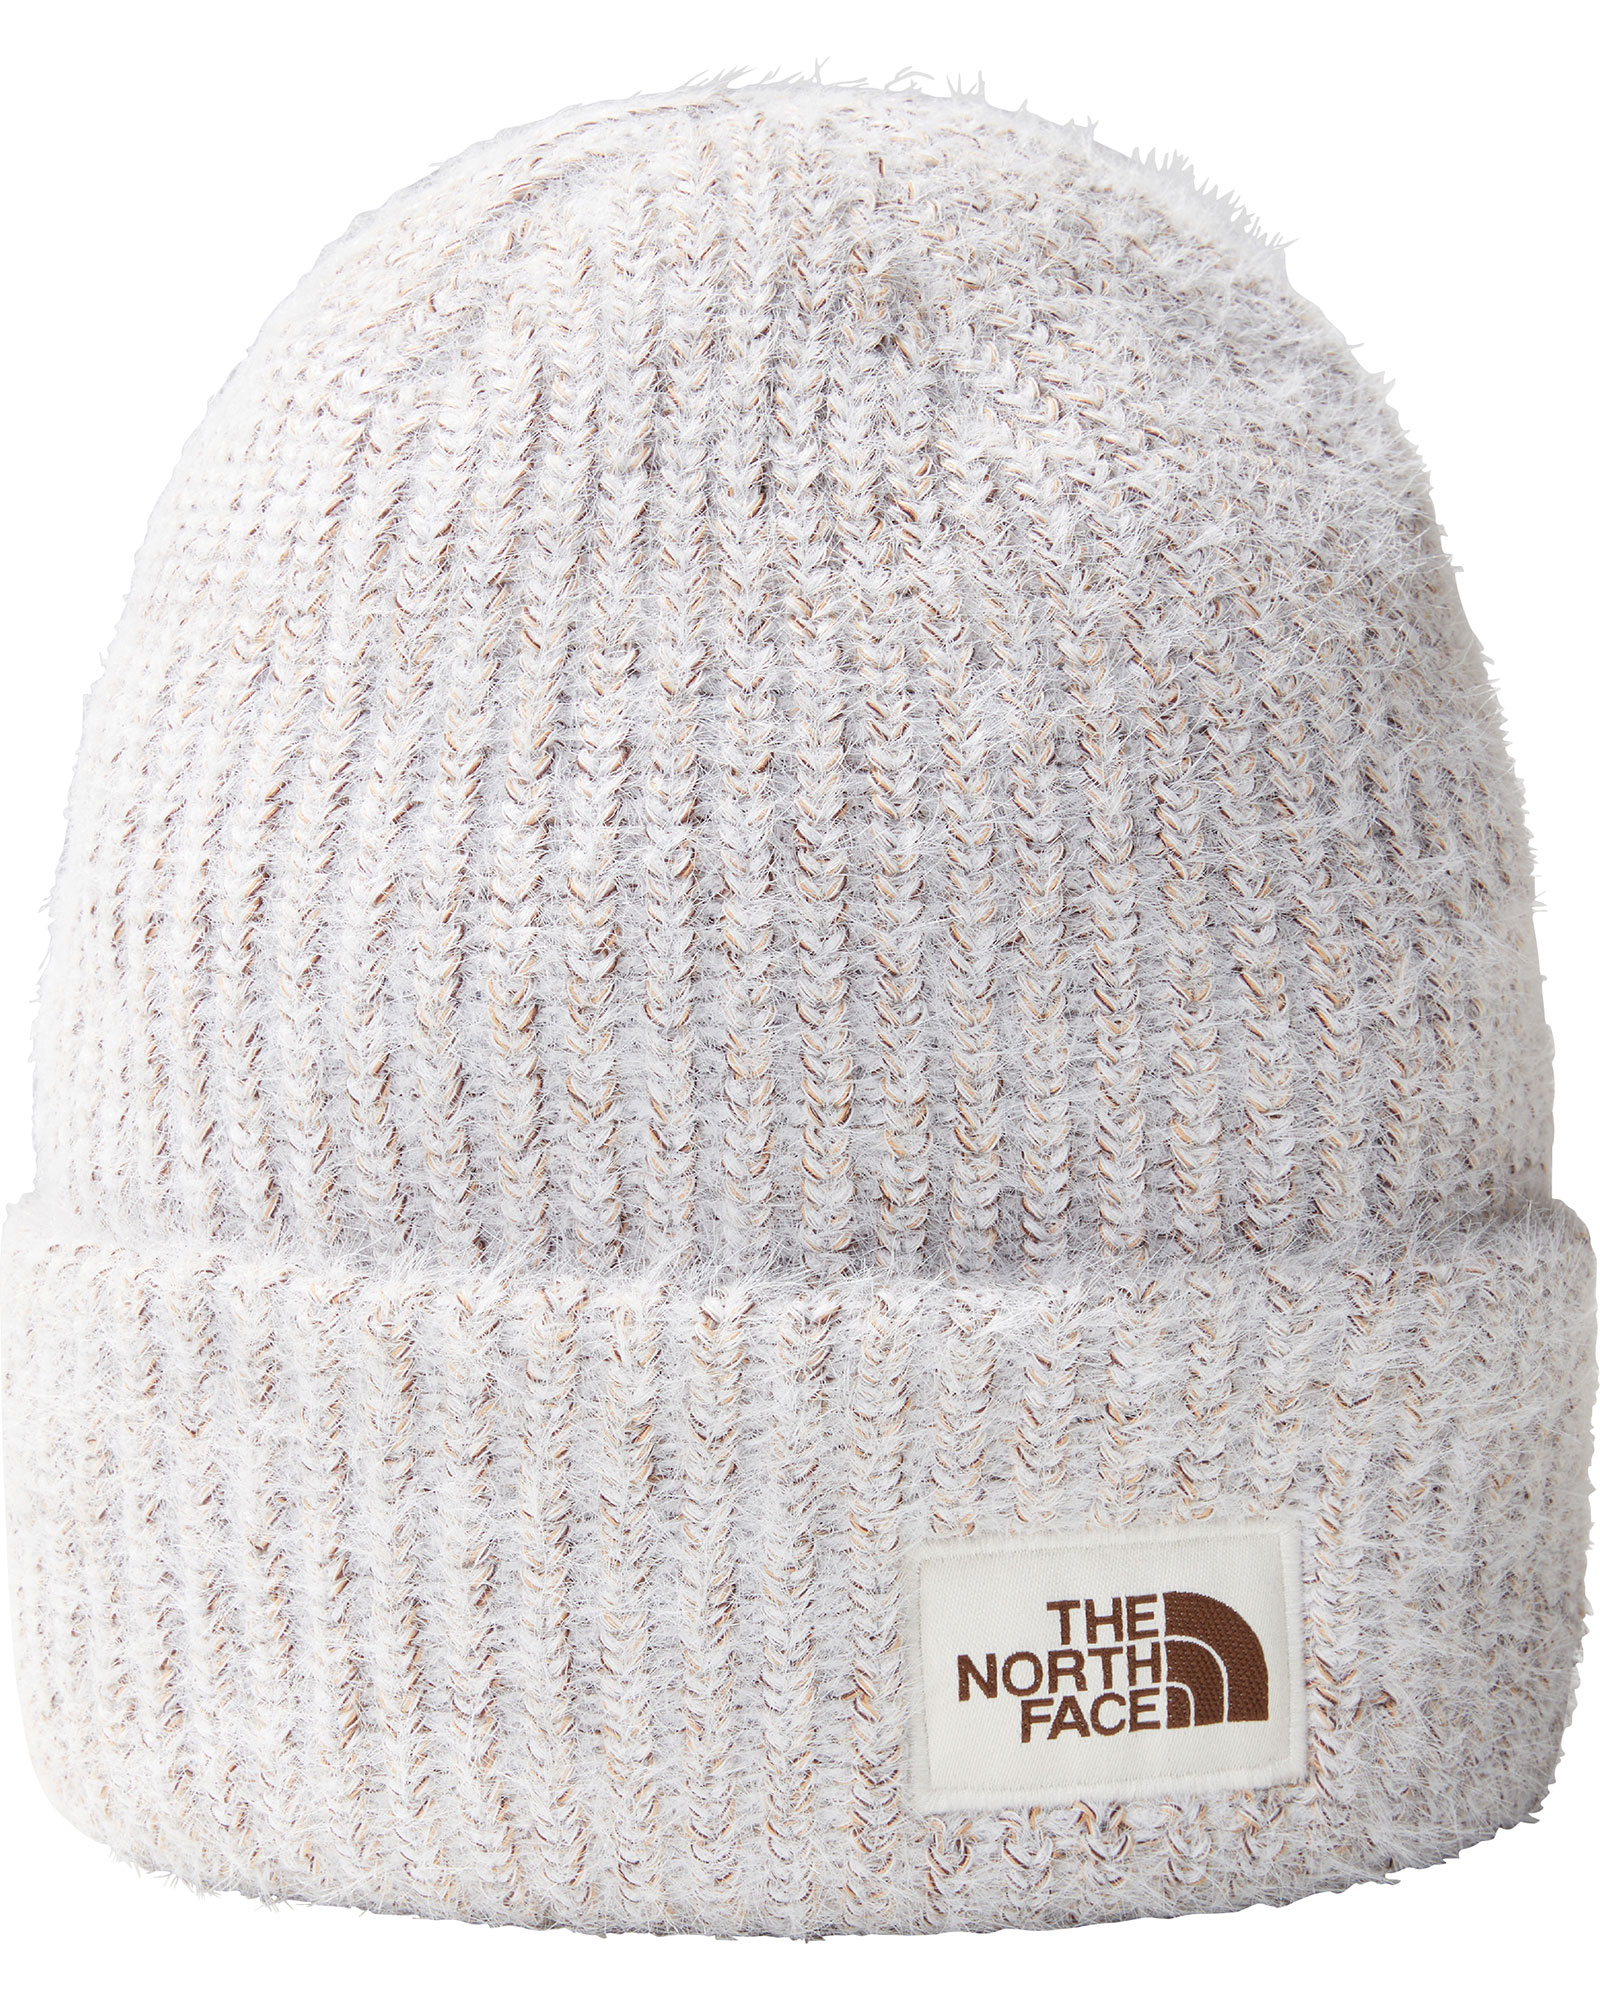 The North Face Salty Bae Beanie - Dusty Periwinkle